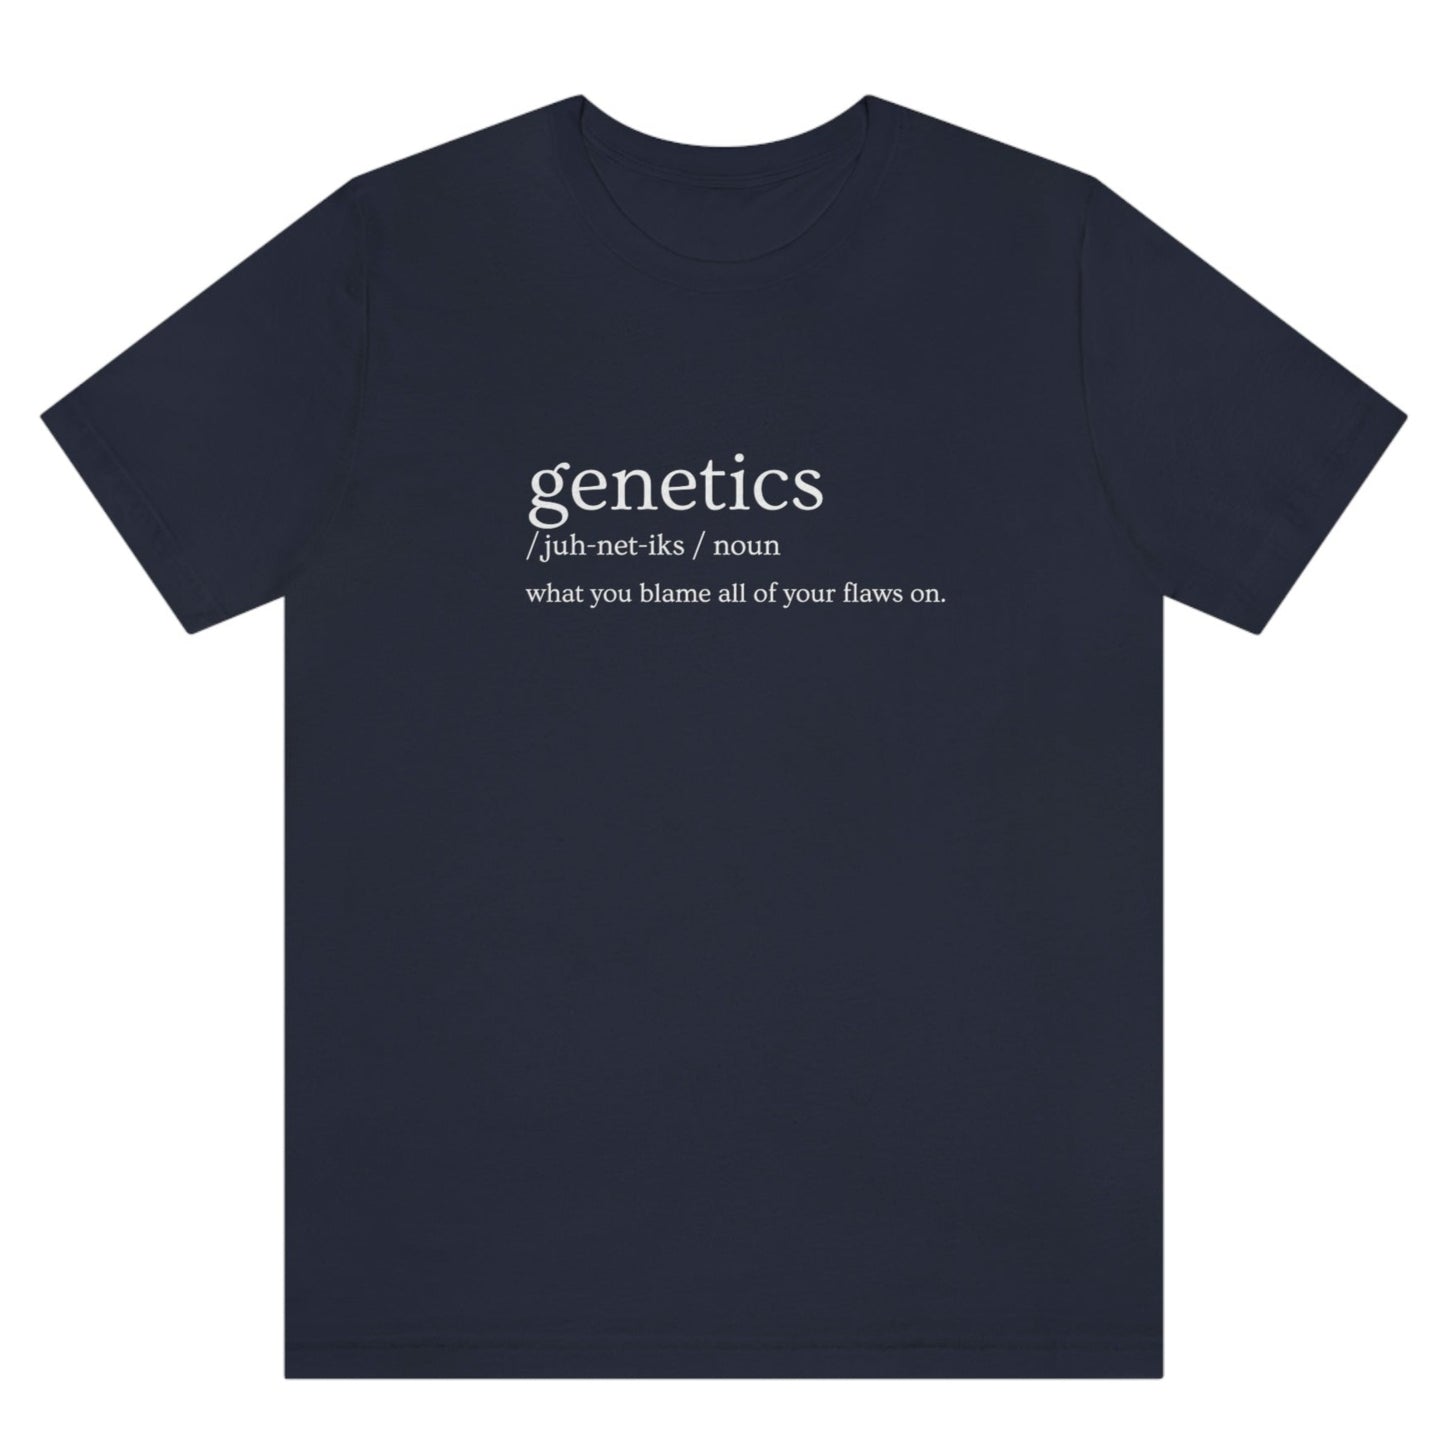 genetics-what-you-blame-all-of-your-flaws-on-navy-t-shirt